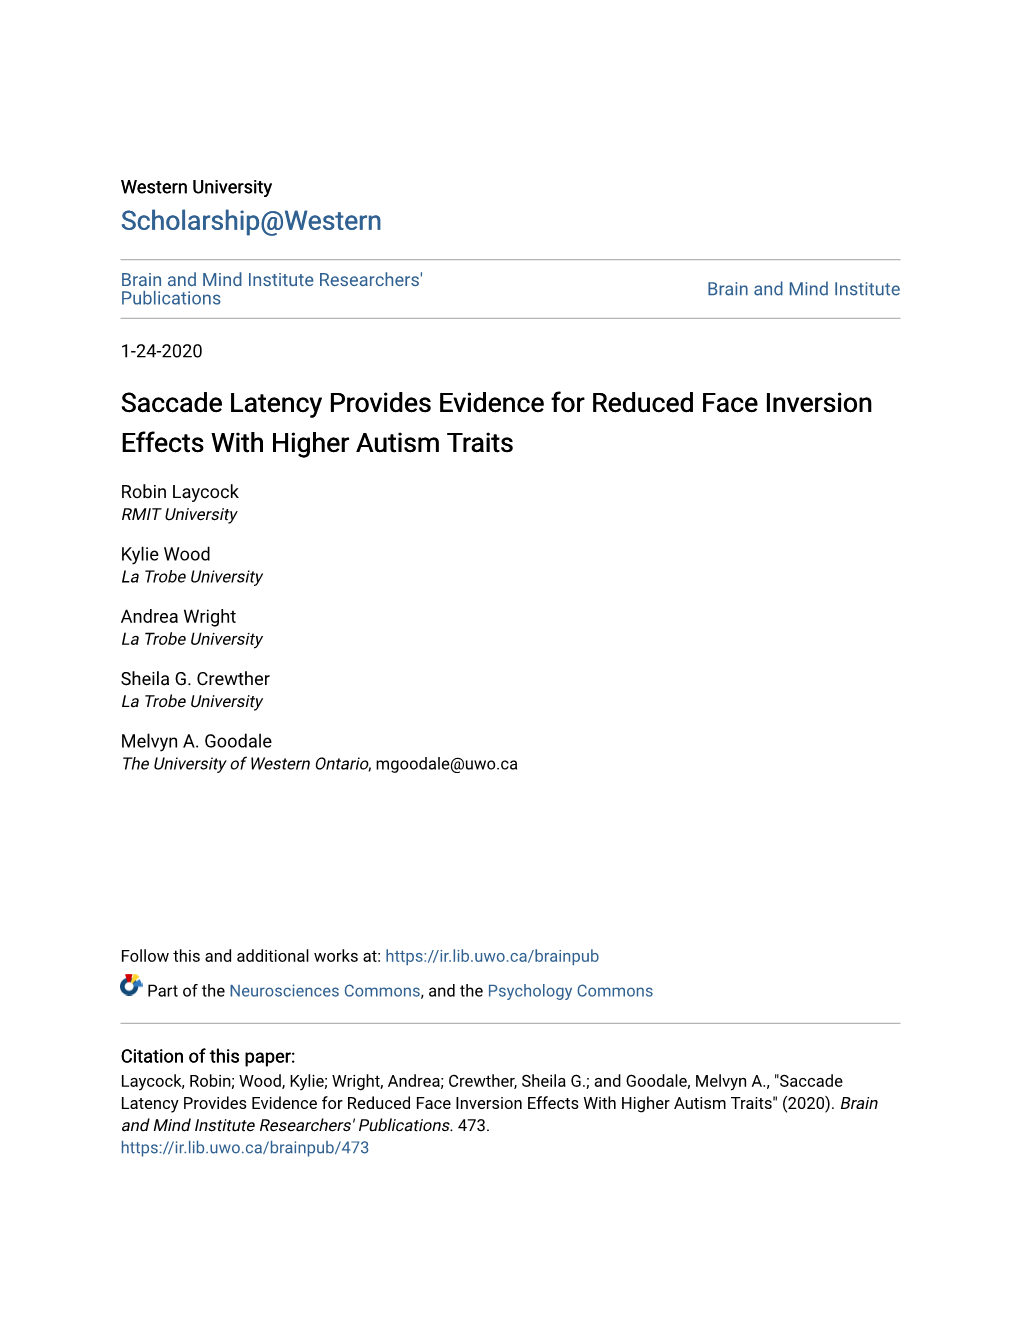 Saccade Latency Provides Evidence for Reduced Face Inversion Effects with Higher Autism Traits